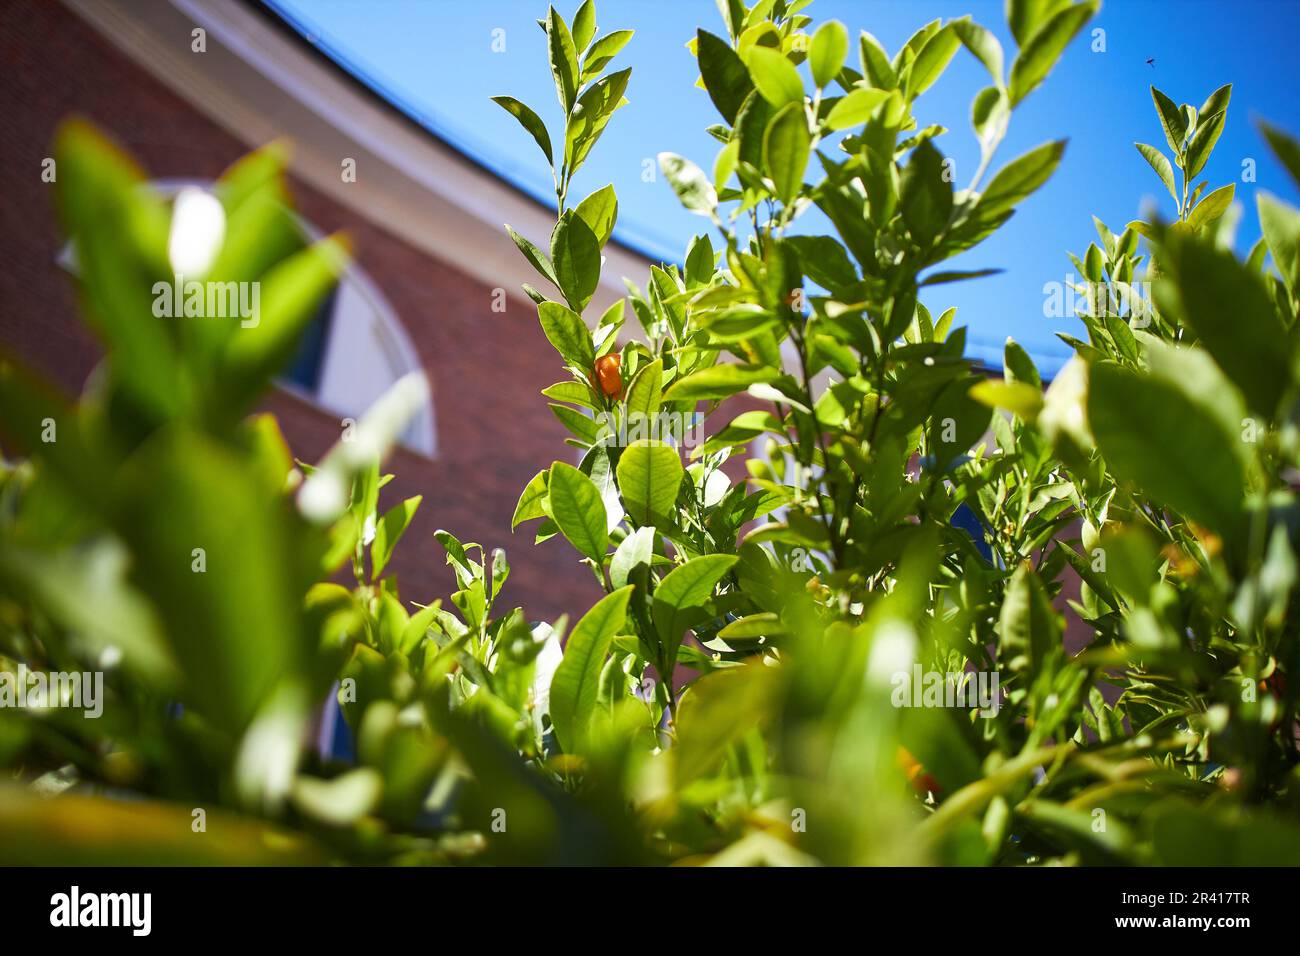 Citrus orange fruits on the branches in bright sunlight in the summer garden. Tangerine tree close-up. Stock Photo